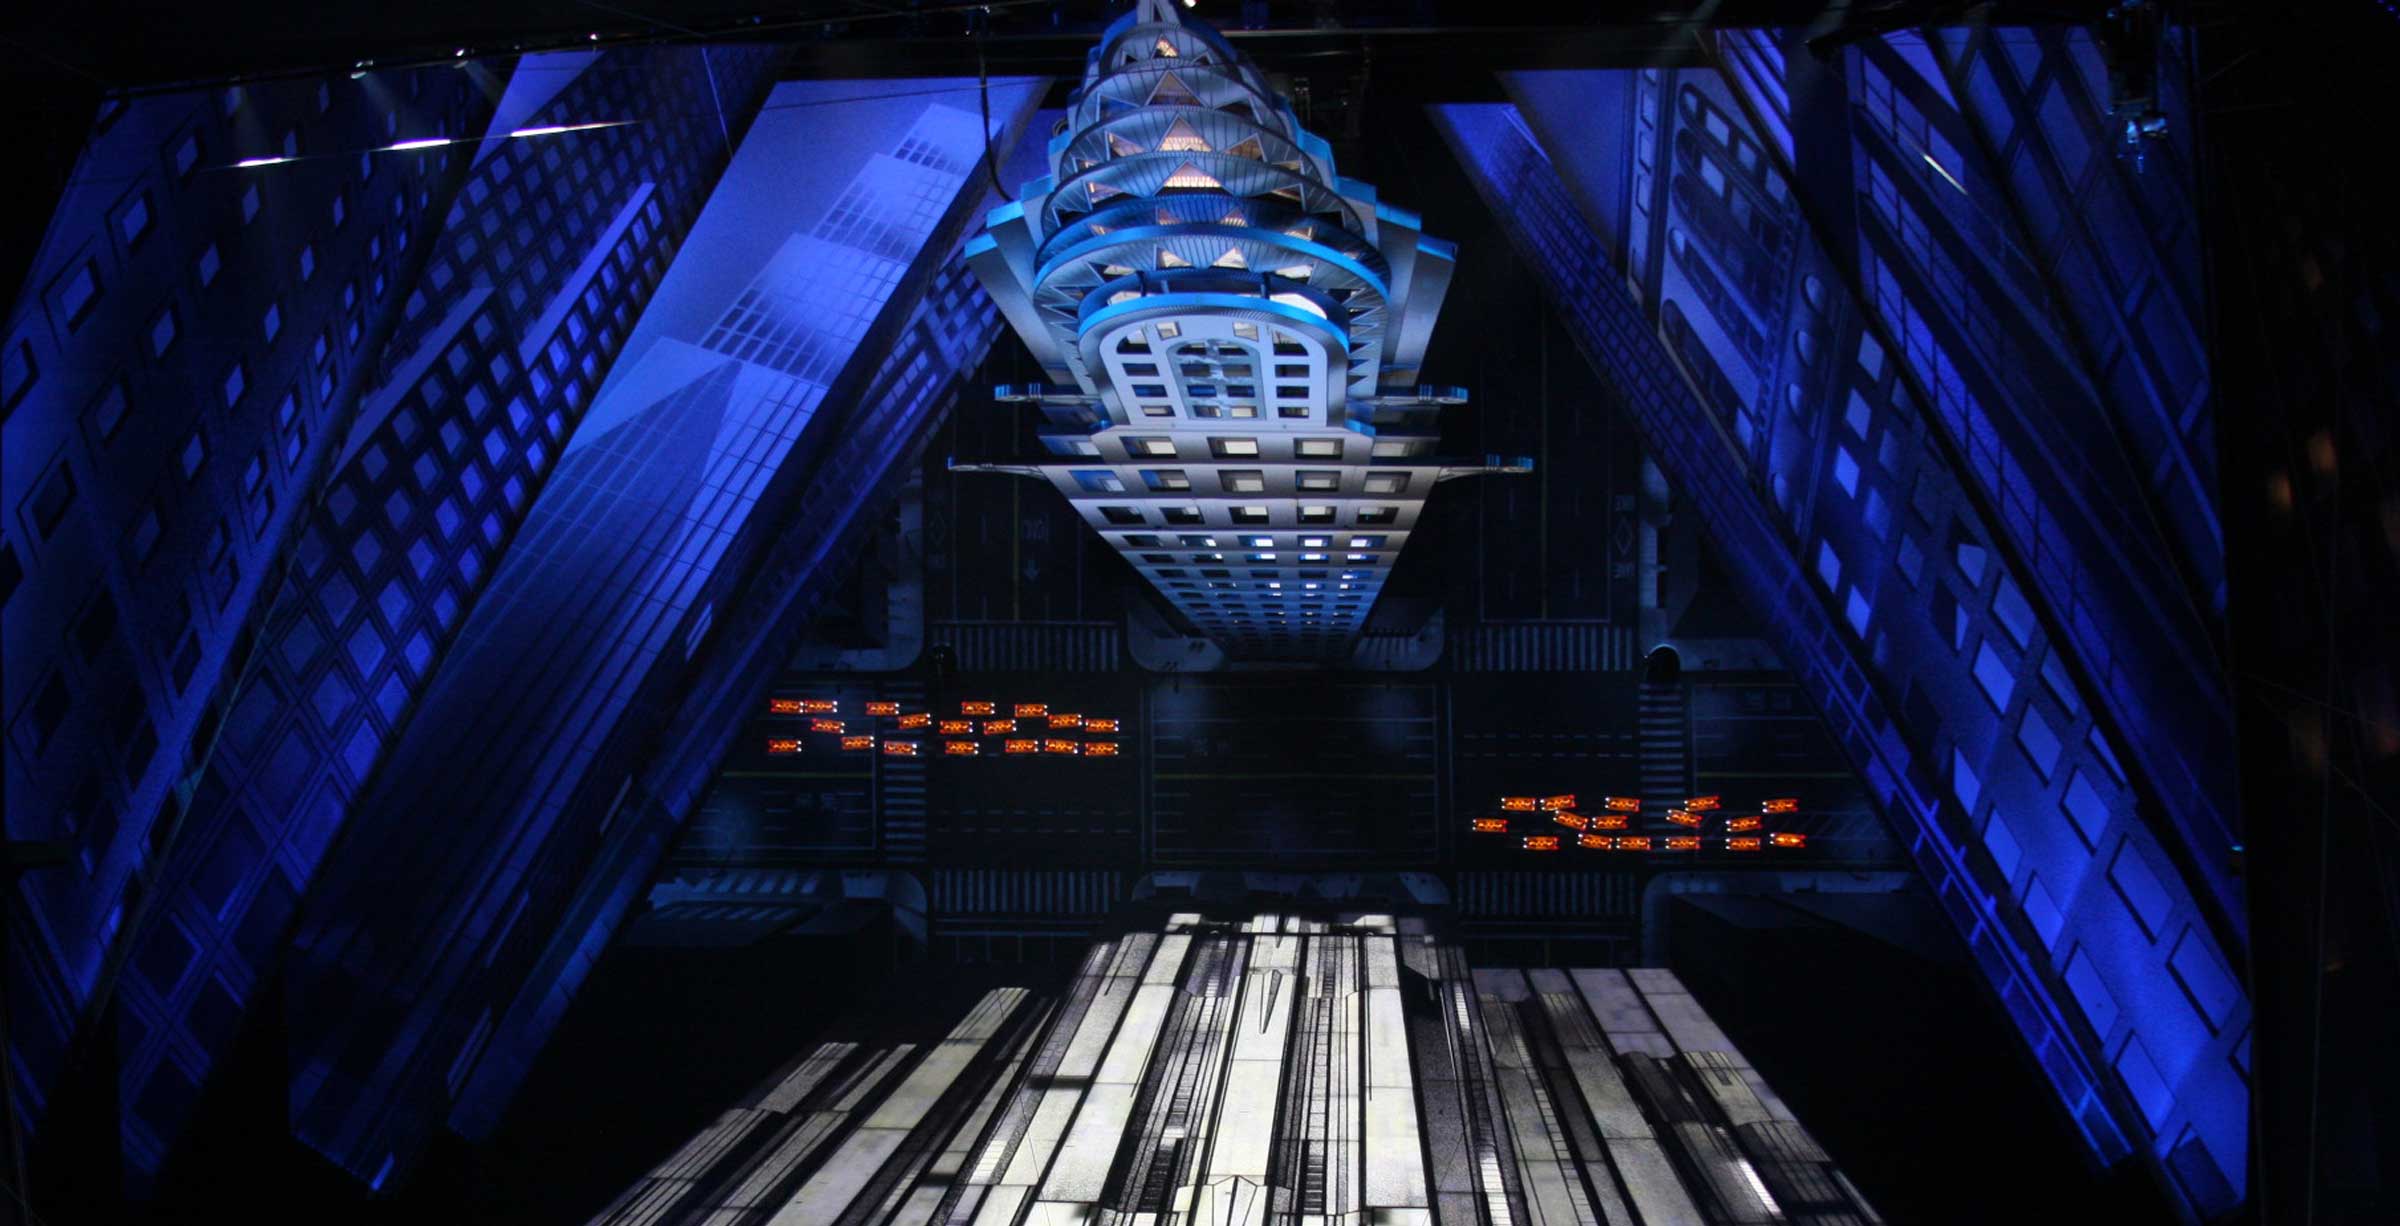 Set and lighting design from Spiderman